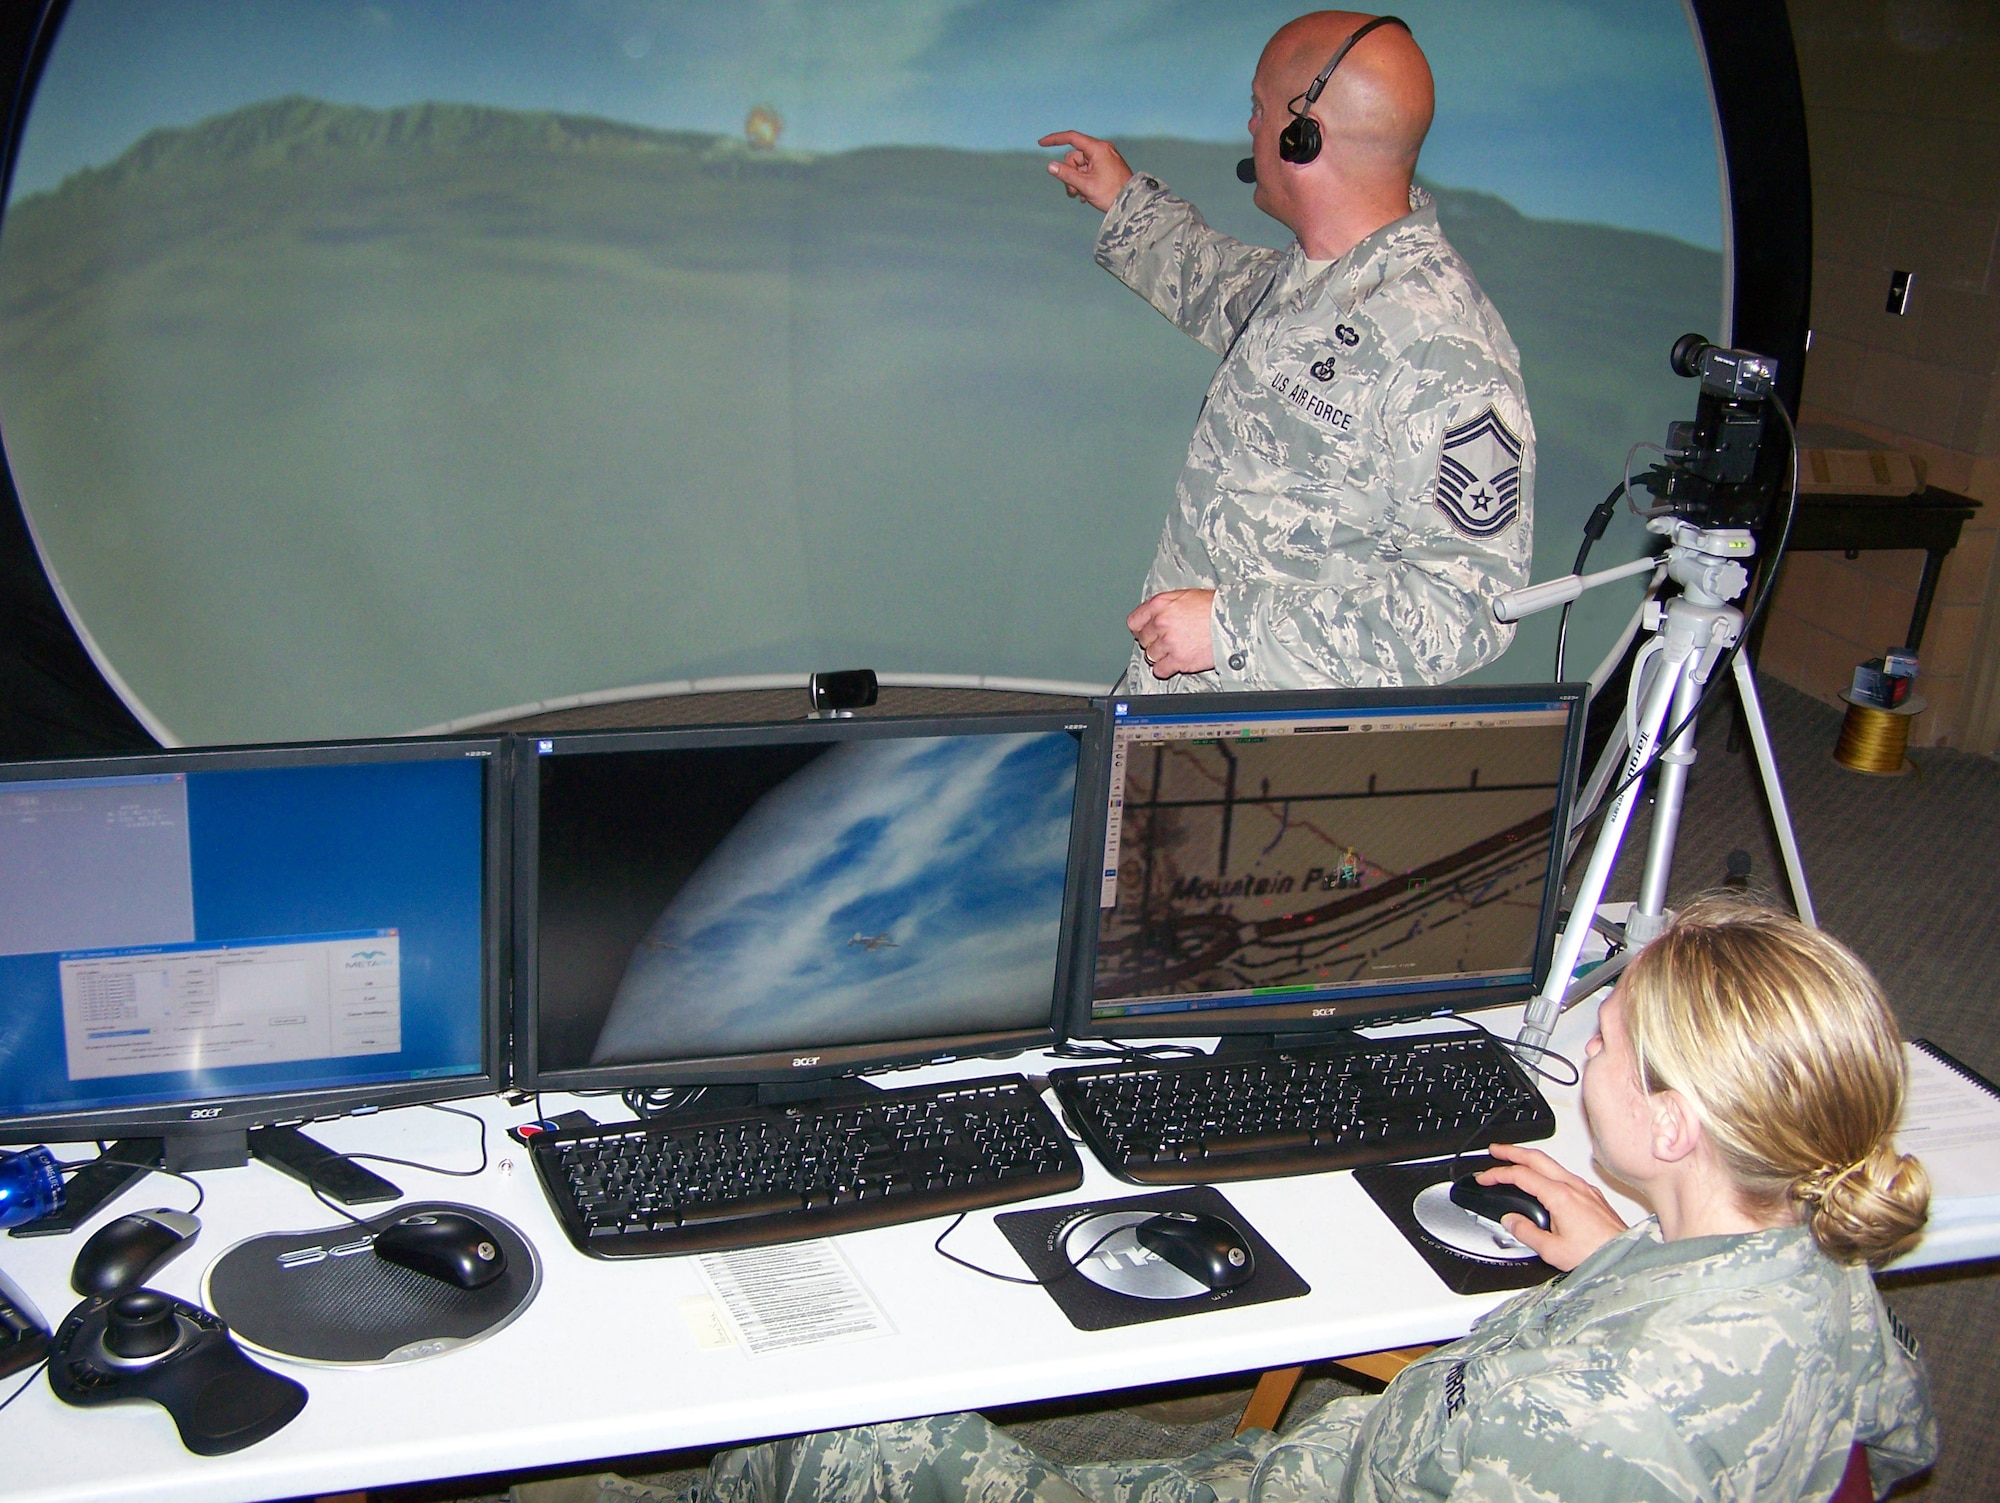 Senior Master Sergeant Alan Van Pate (standing) calls in an airstrike to “destroy” an enemy tank during joint combat air support training on the Joint Terminal Attack Controller (JTAC) virtual training dome at the Grayling Air Gunnery Range in Alpena, Mich. Technical Sergeant Claire LaFleur (seated) enters information into the simulator so that the simulated aircraft reacts as intended. The 711th Human Performance Wing, Human Effectiveness Directorate’s Warfighter Readiness Research Division in Mesa, Ariz. is using the Grayling Range as a testing site for ways to improve JTAC training.